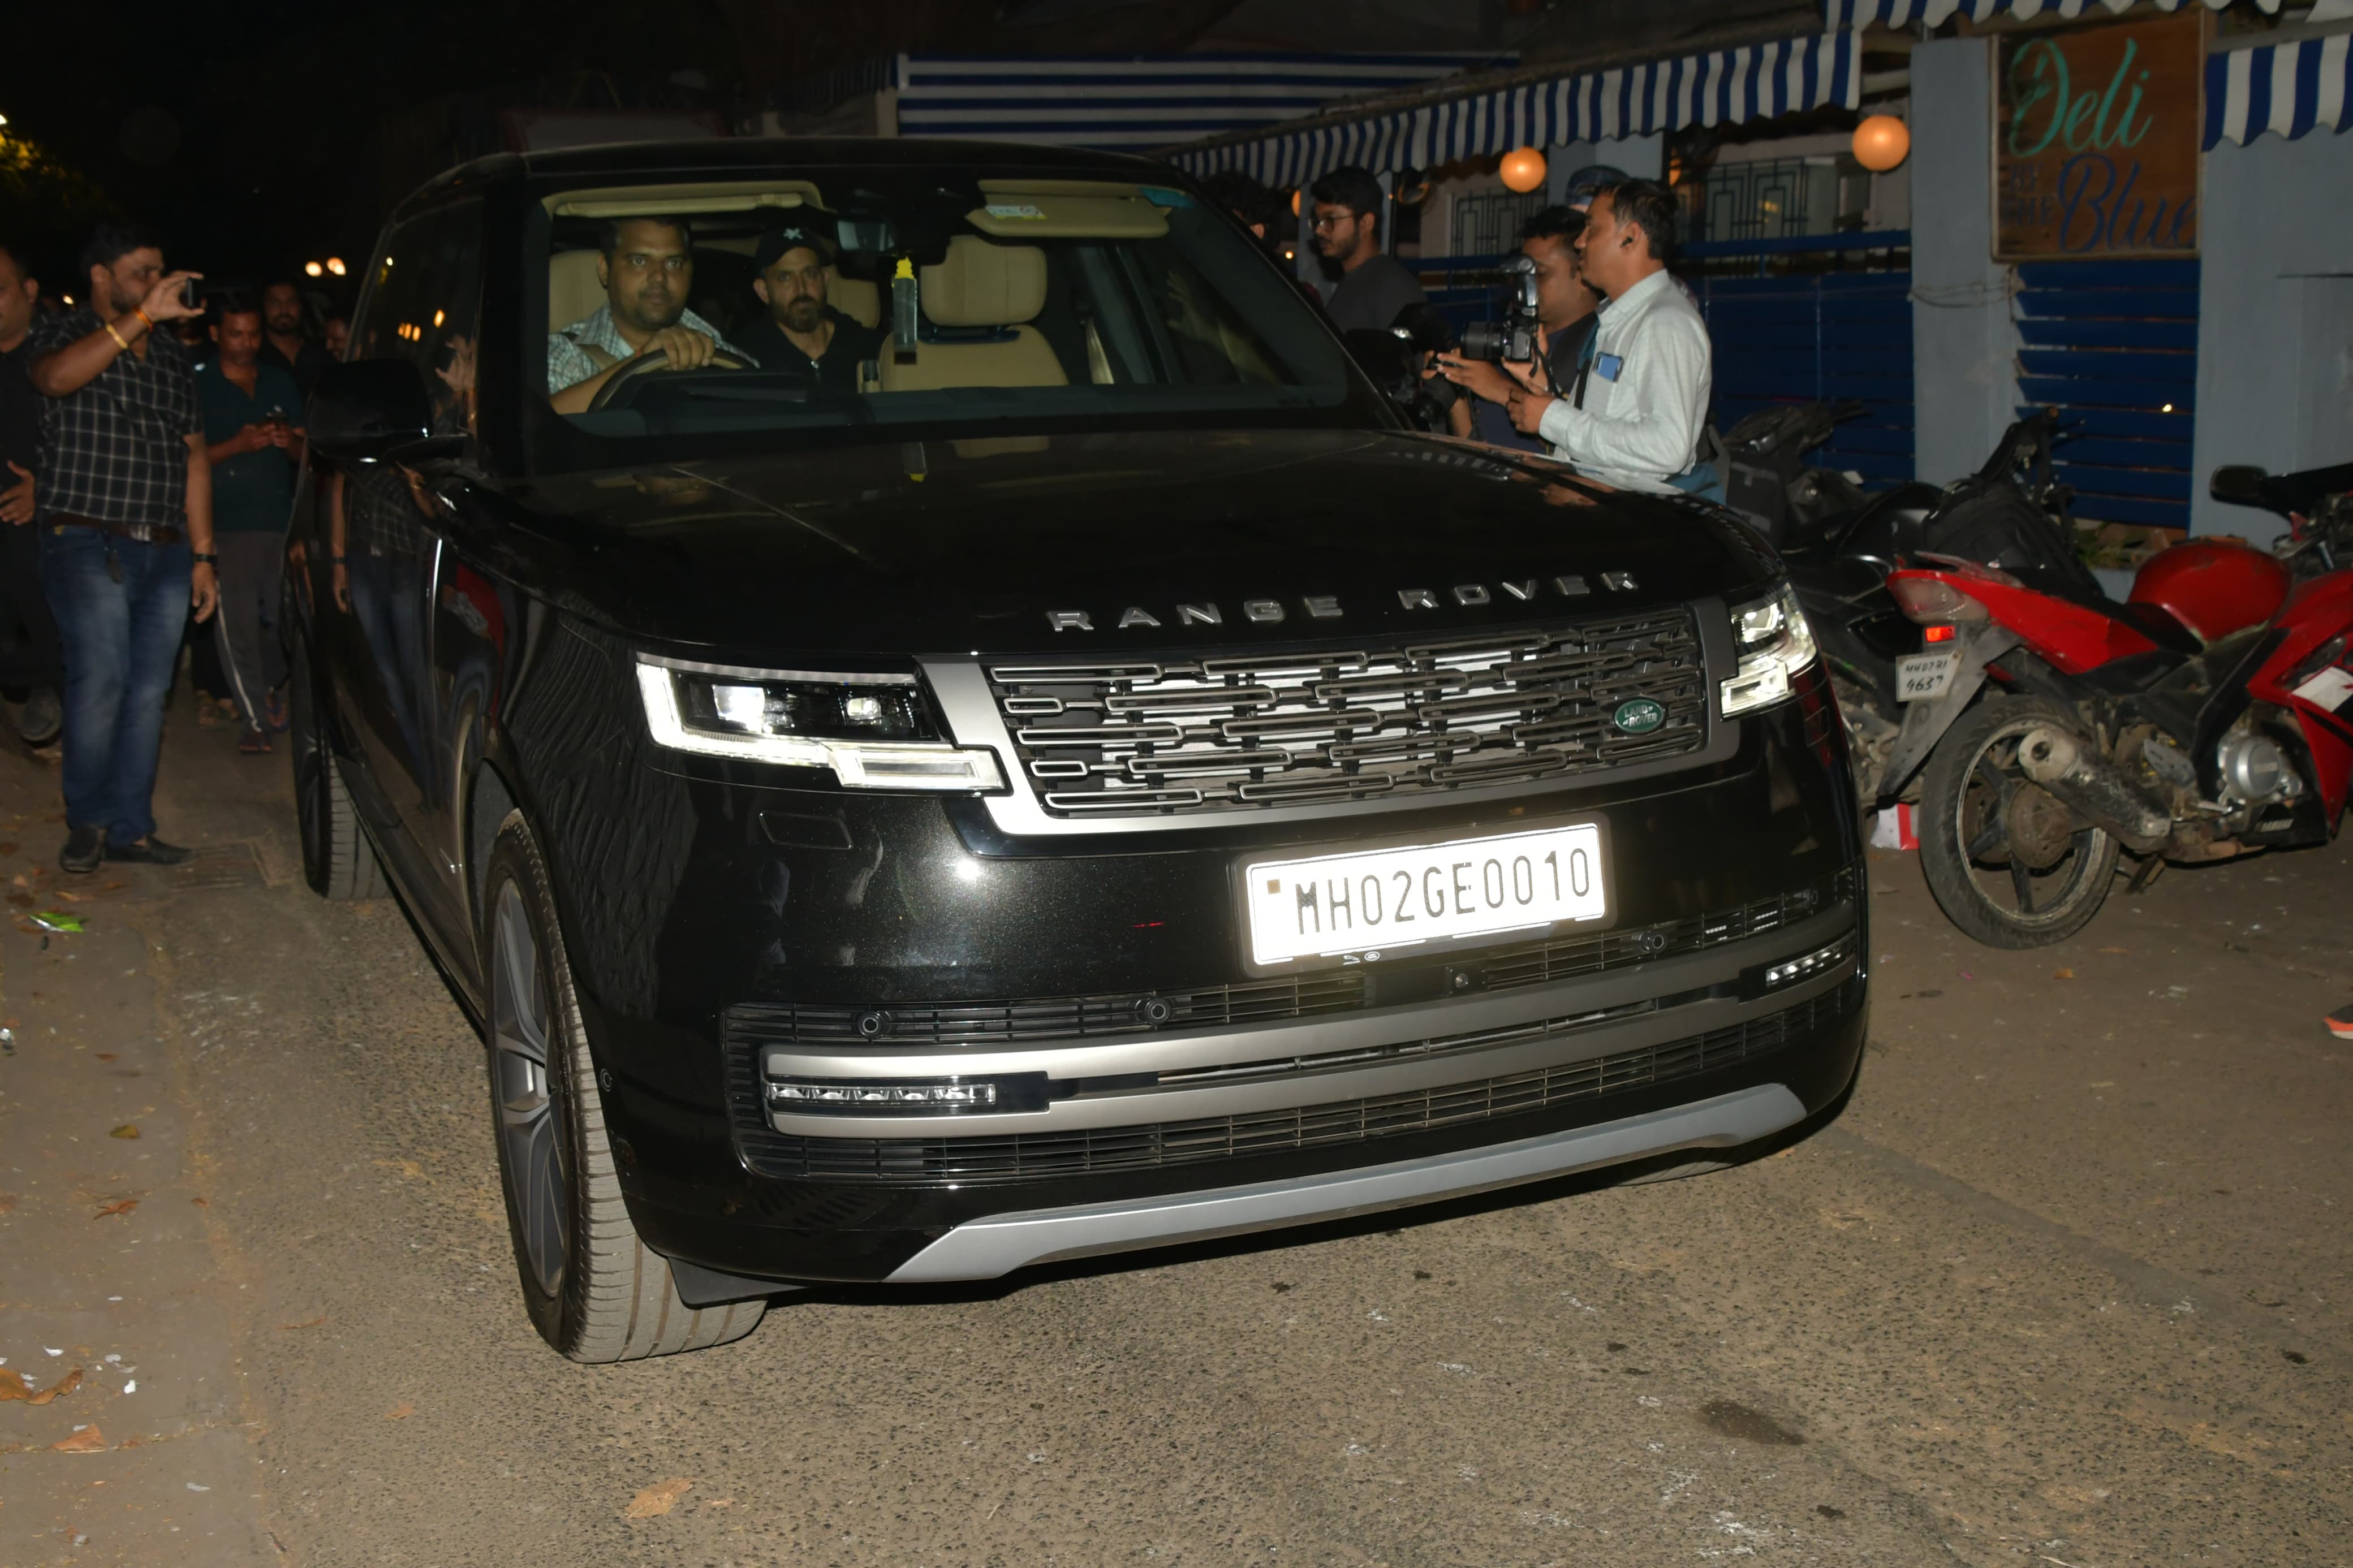 As per various outlets, Hrithik Roshan brought home a new car today